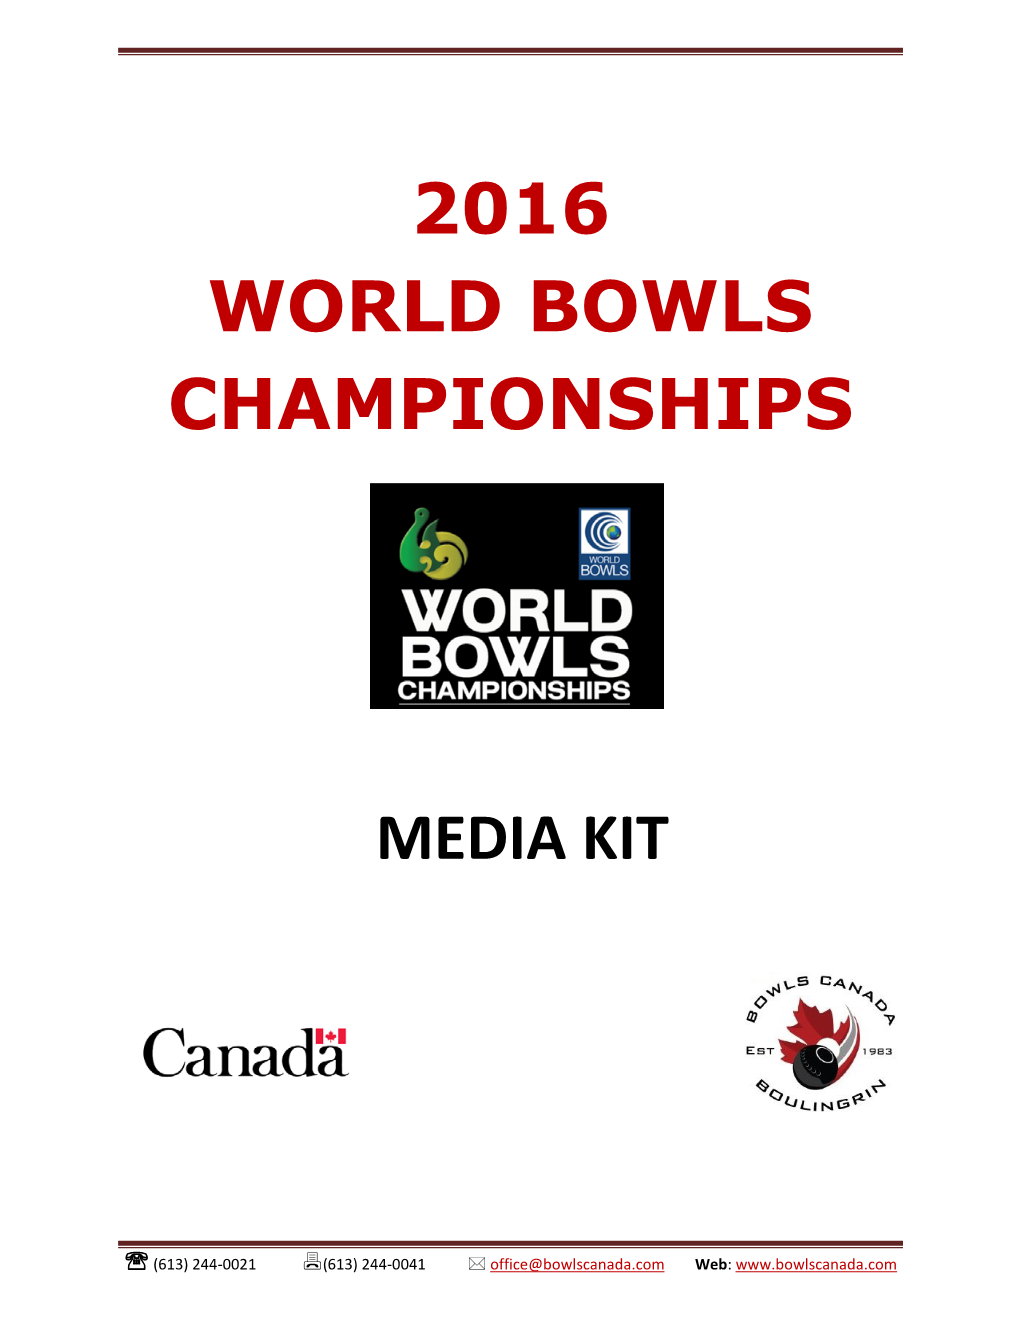 To View the 2016 World Bowls Championships Media